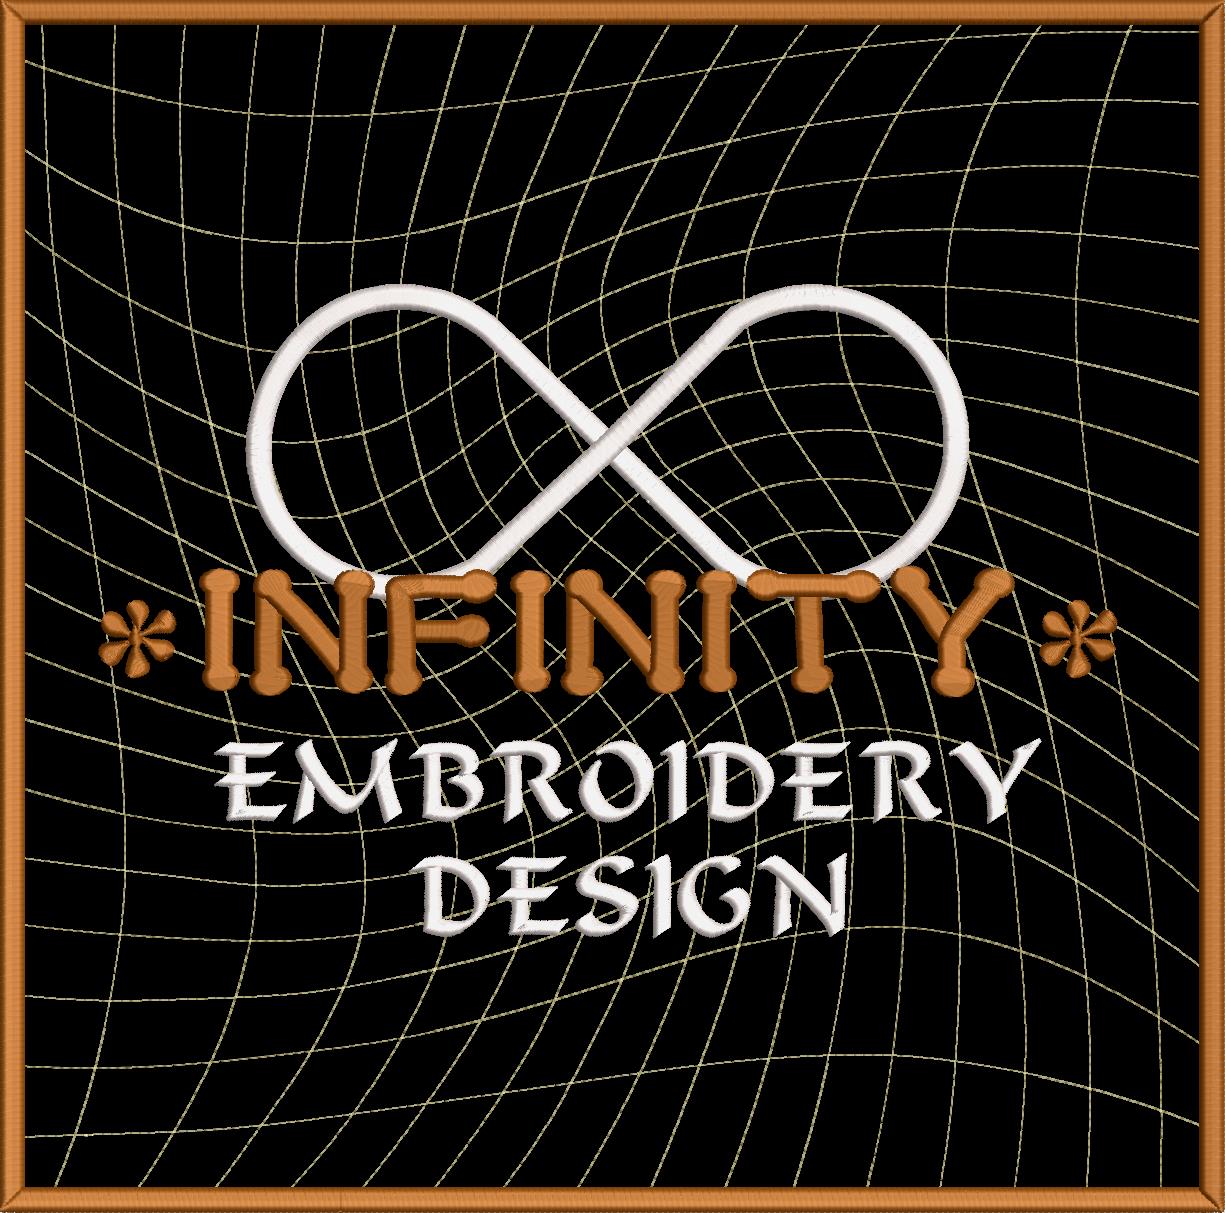 Infinity Embroidery Design